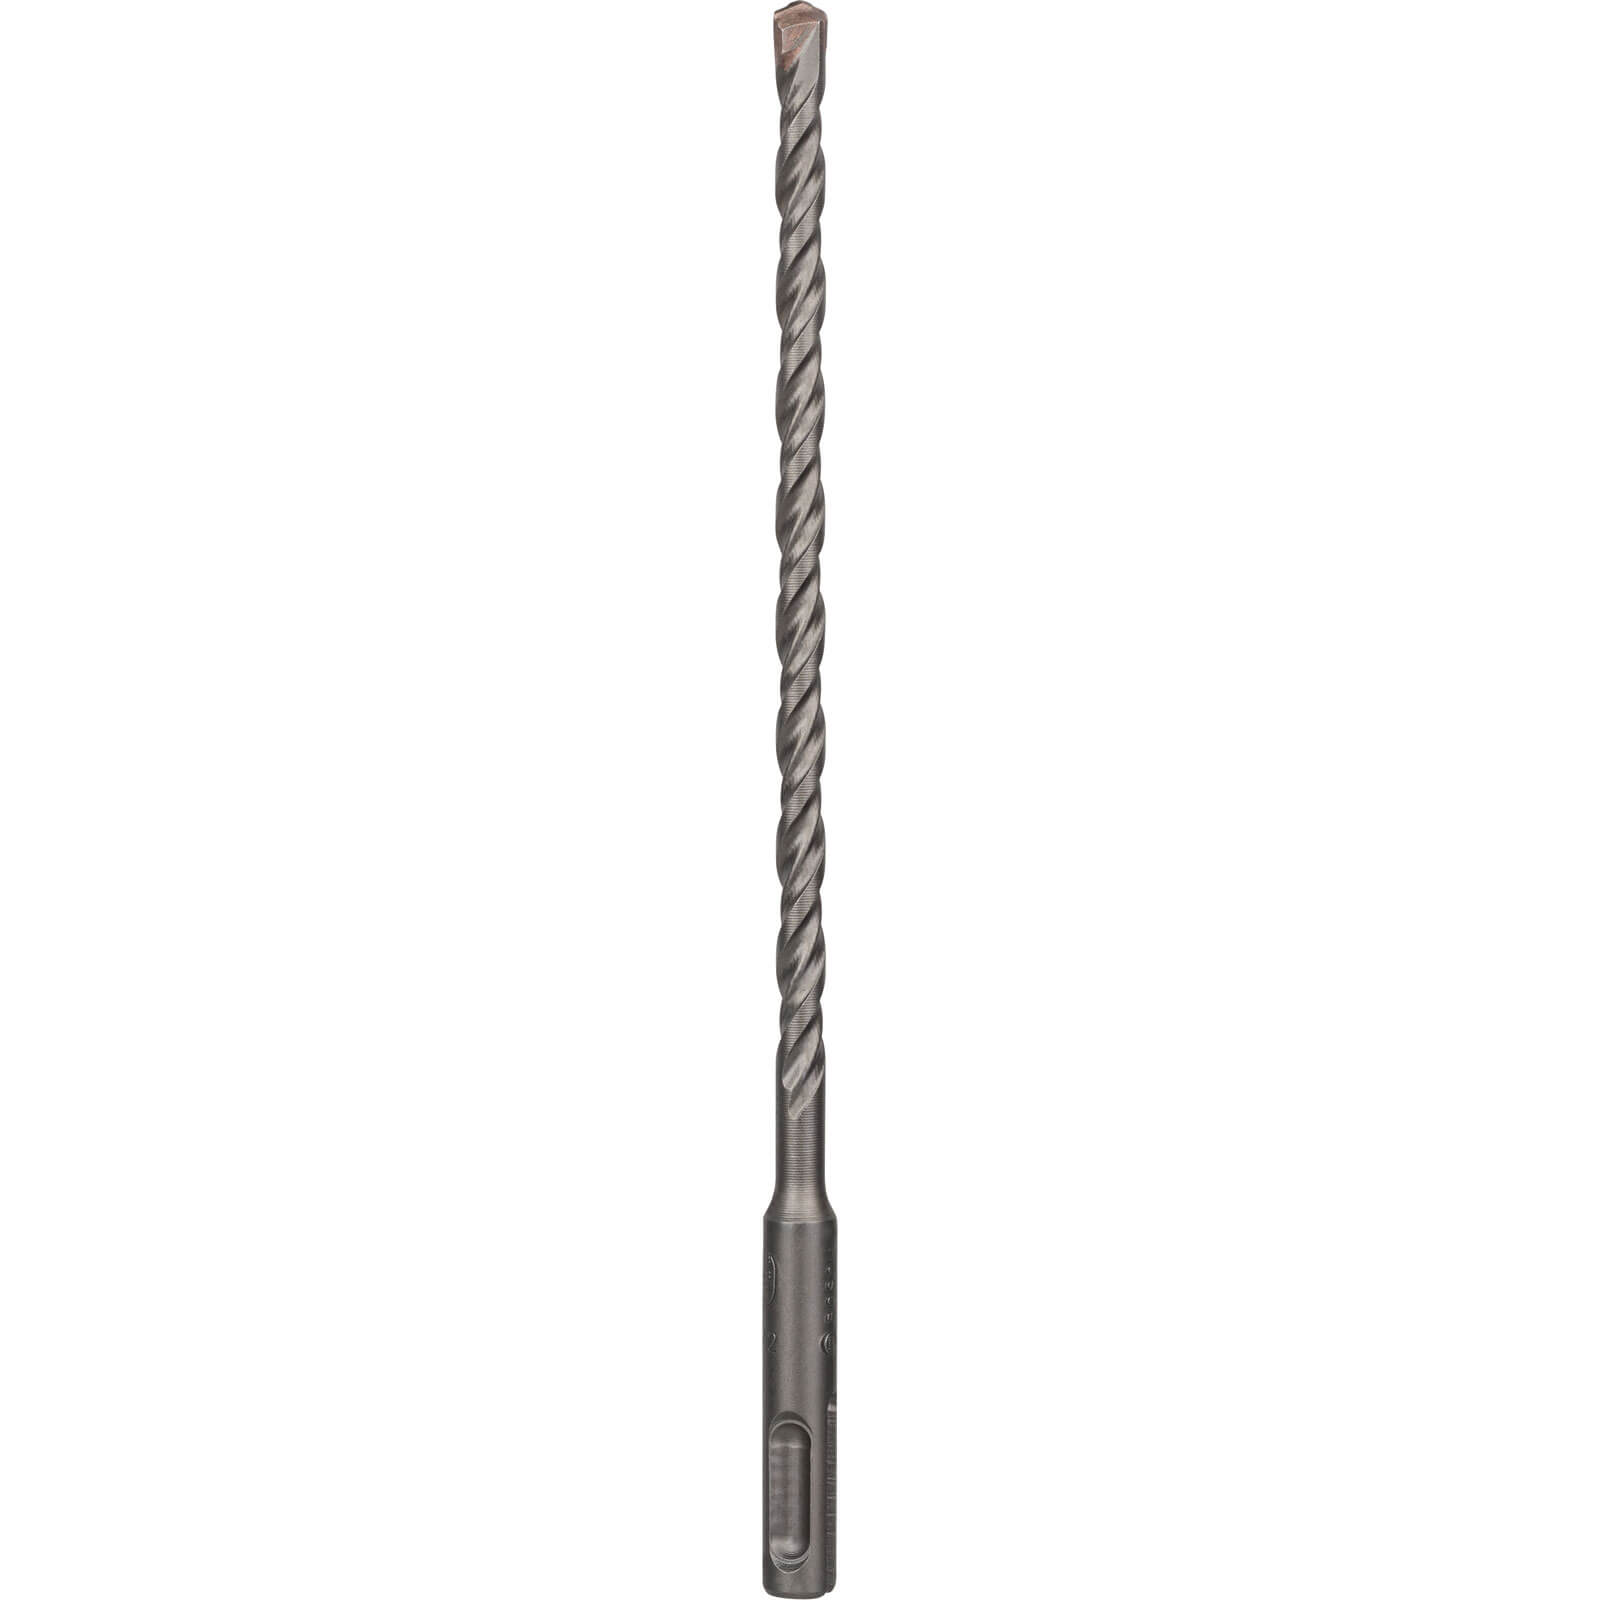 Image of Bosch Series 3 SDS Plus Masonry Drill Bit 7mm 210mm Pack of 10